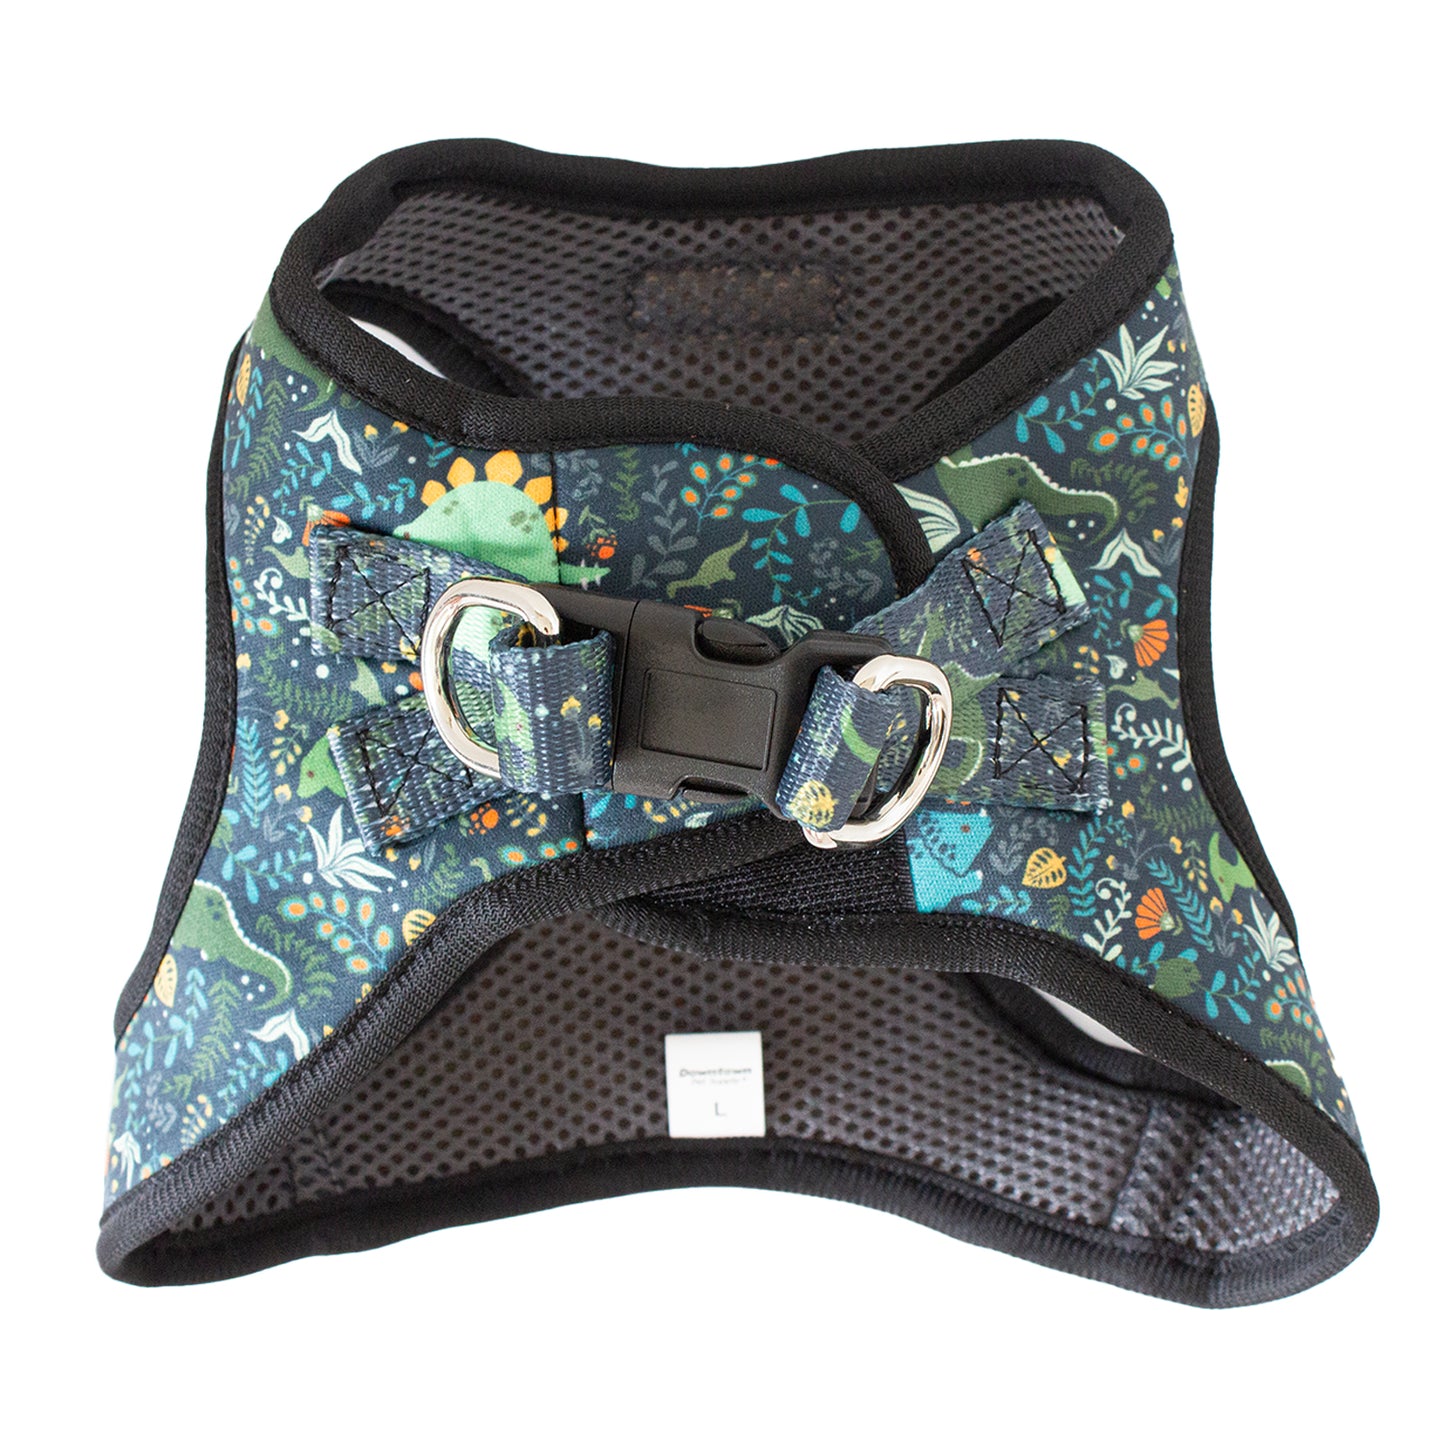 Best No Pull, Step in Adjustable Comfort Dog Harness, Easy to Put on Small & Medium Dogs